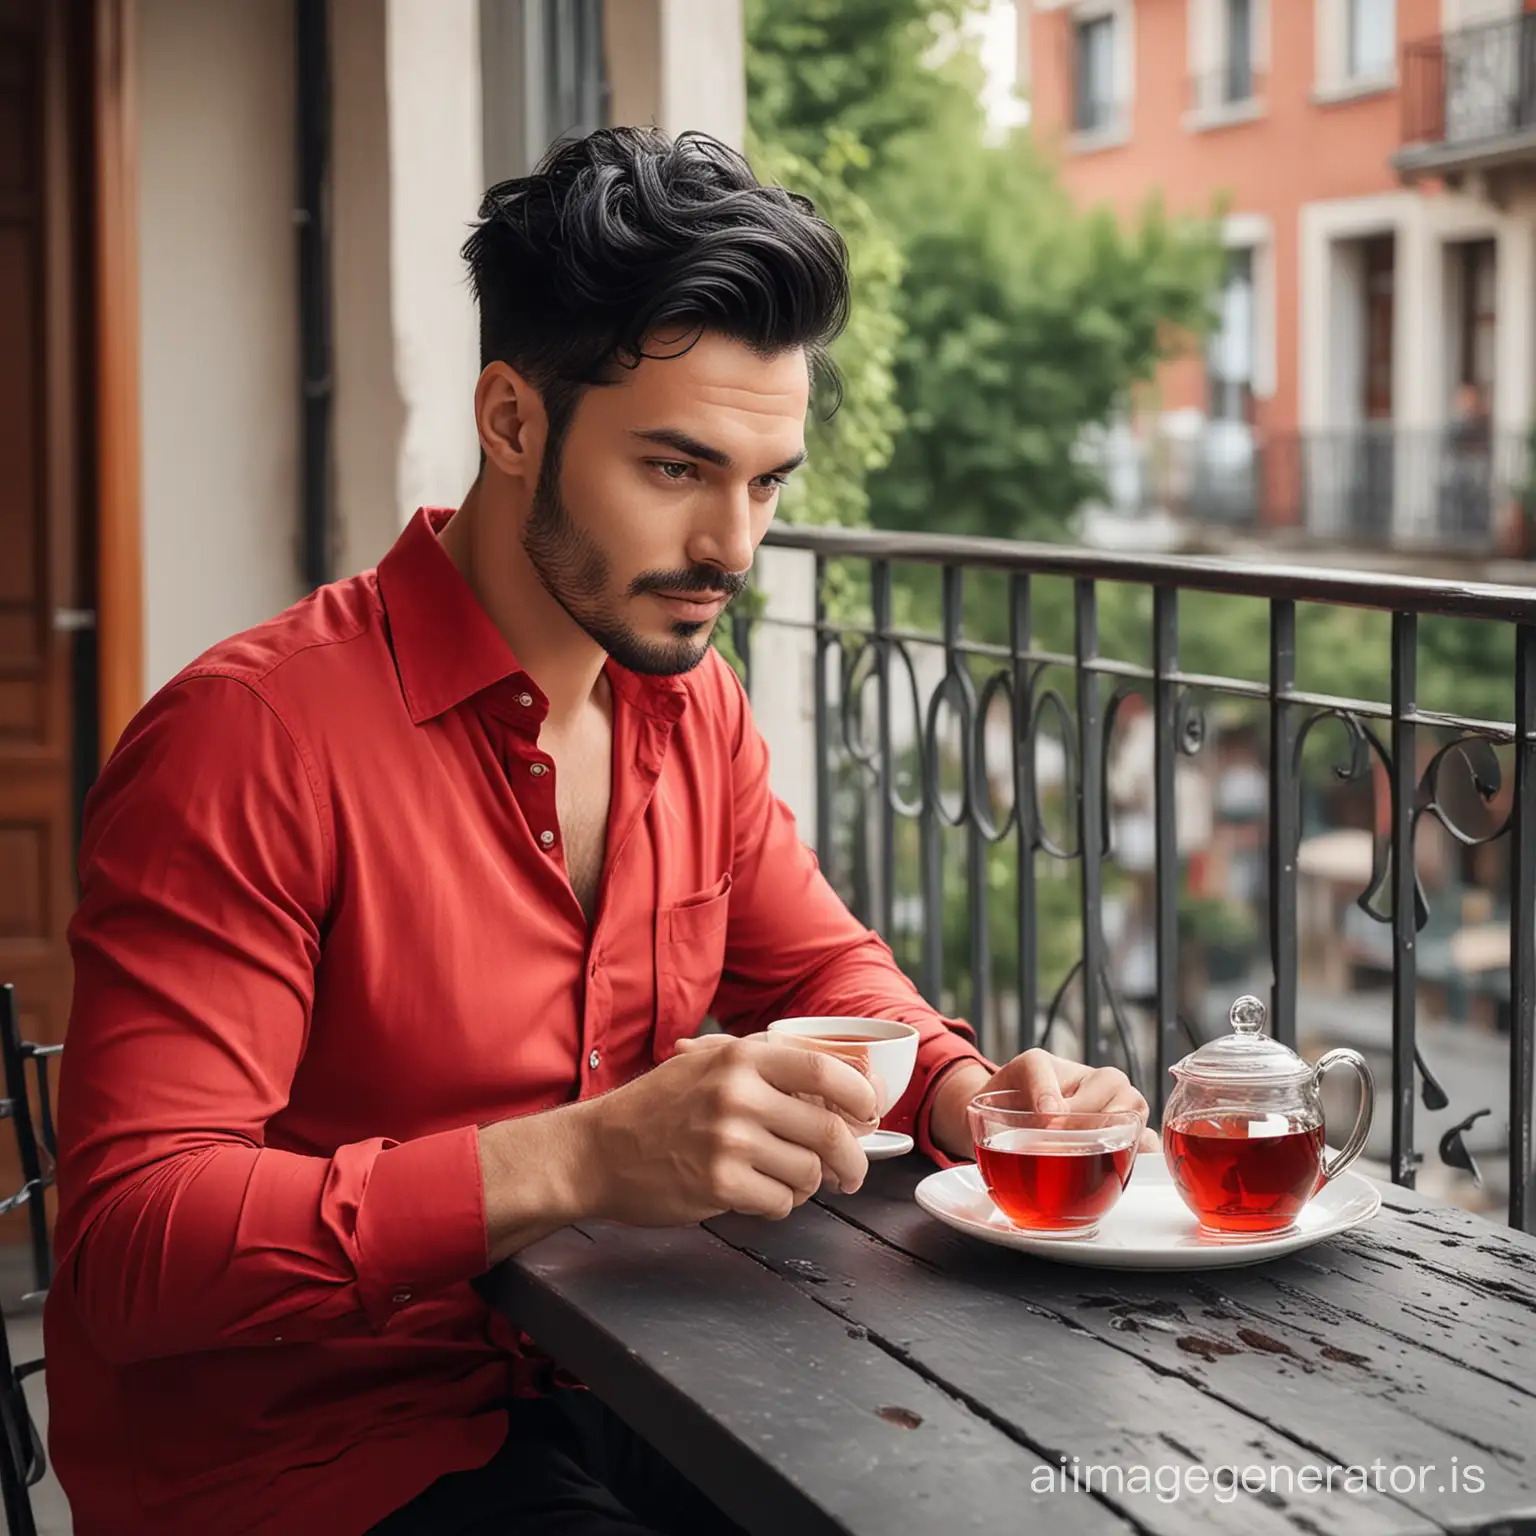 Stylish man with black hairs in balcony and red tea on the table